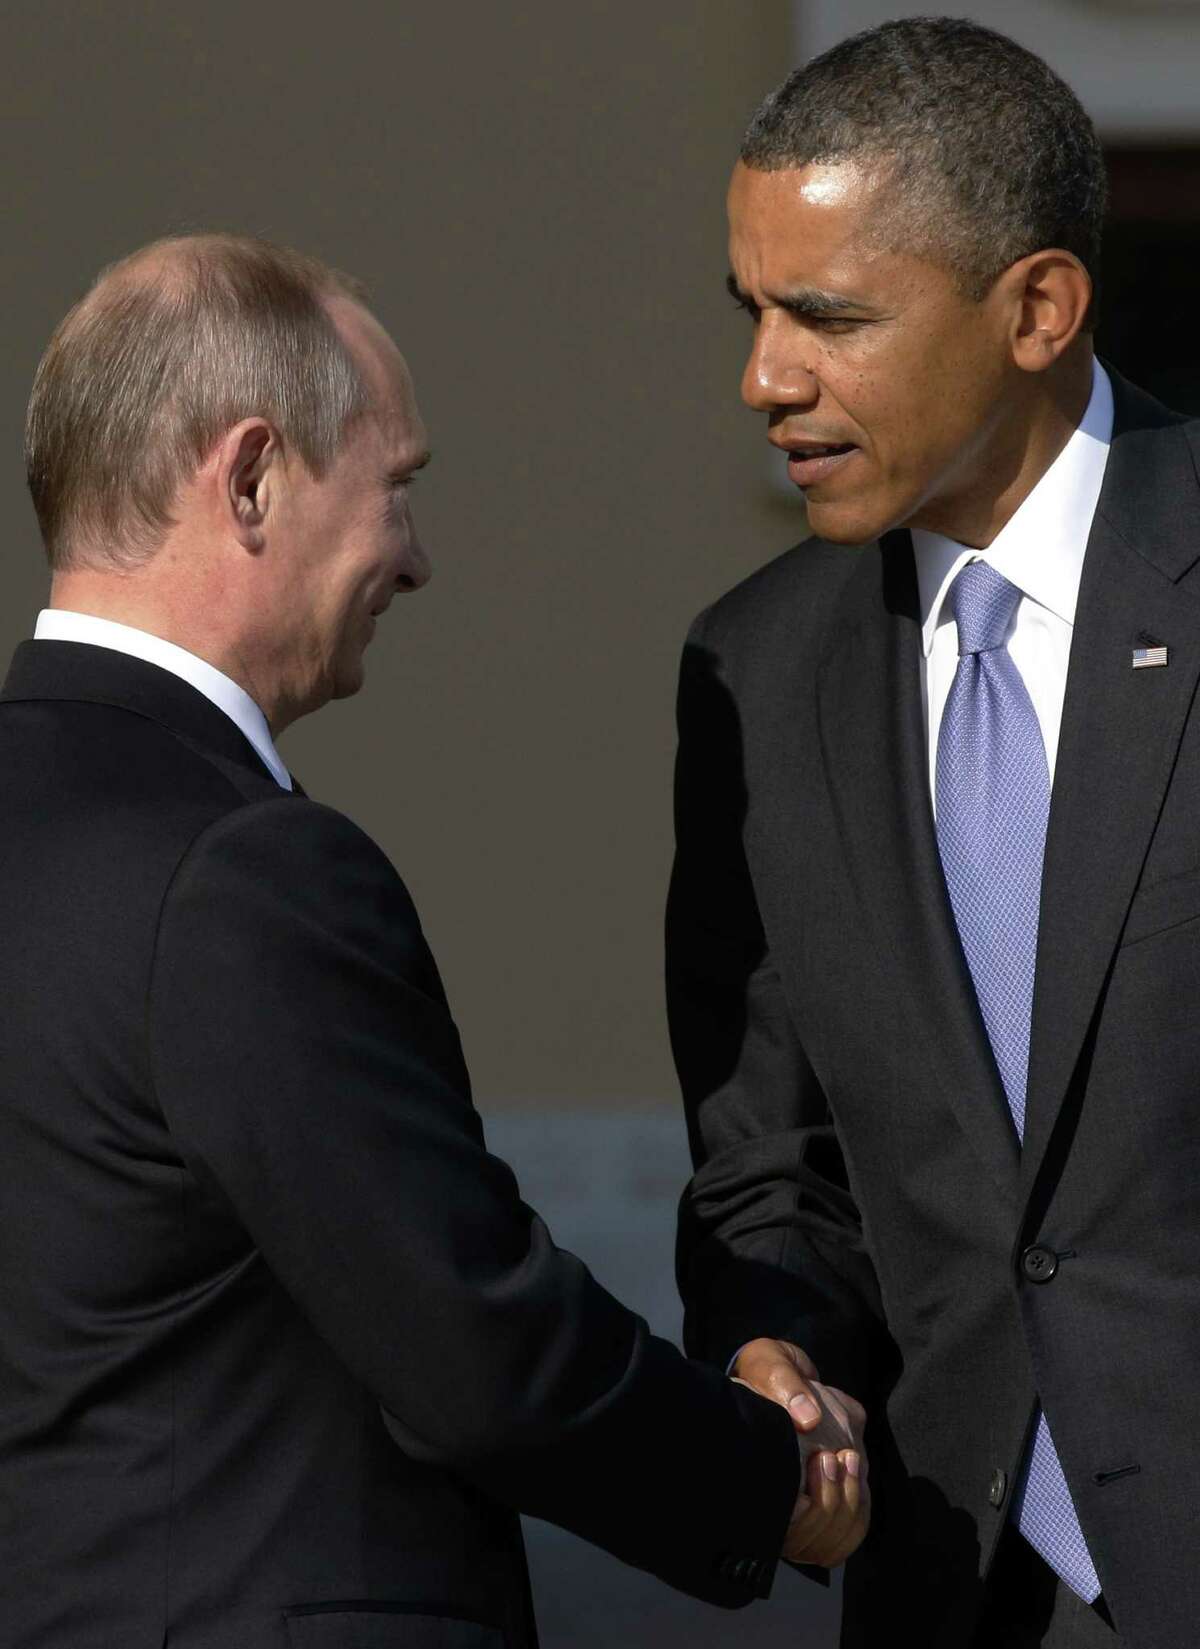 In a happier moment earlier this month, President Vladimir Putin greets President Barack Obama as the American arrived for the G-20 meeting in St. Petersburg, Russia. The White House now is upset with Putin's opinion piece on Syria in the New York Times.